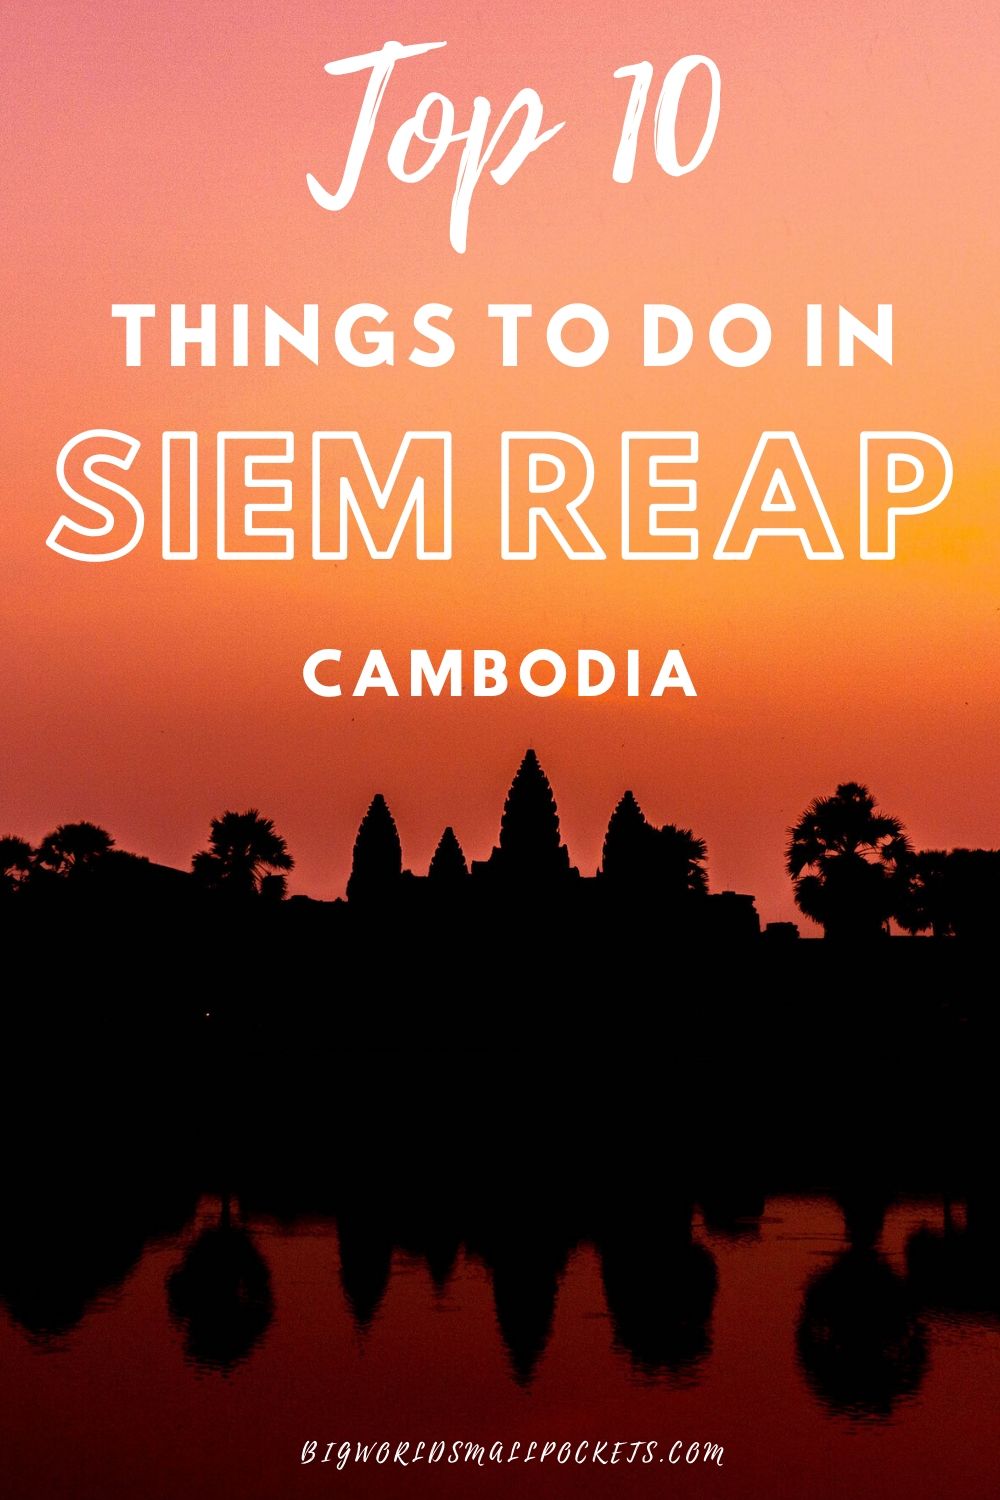 Top 10 Things to Do in Siem Reap, Cambodia